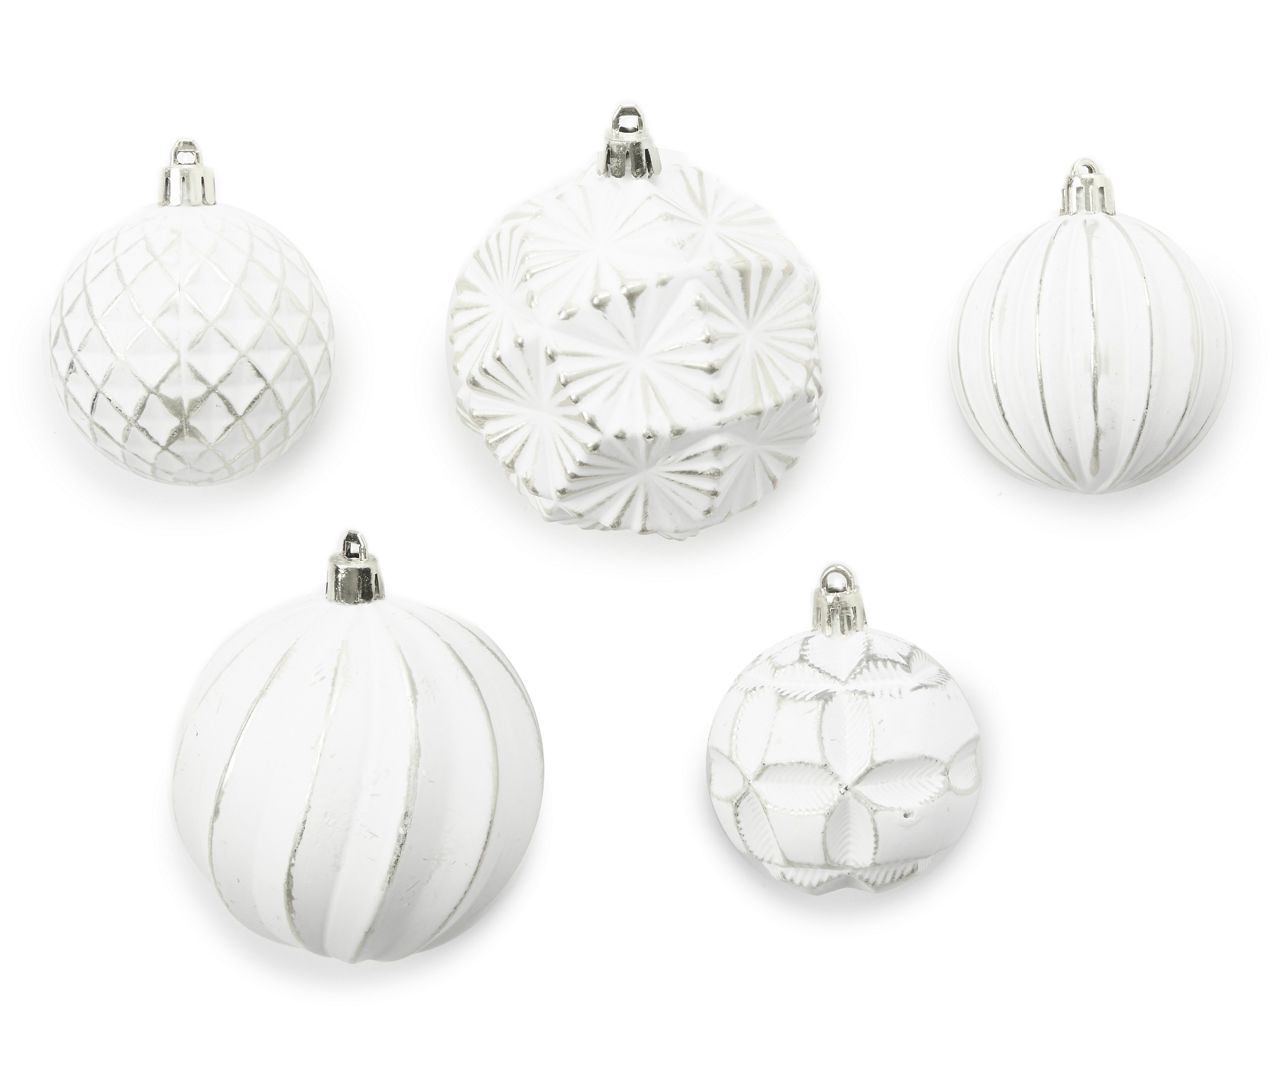 Silver and White Christmas Ornaments